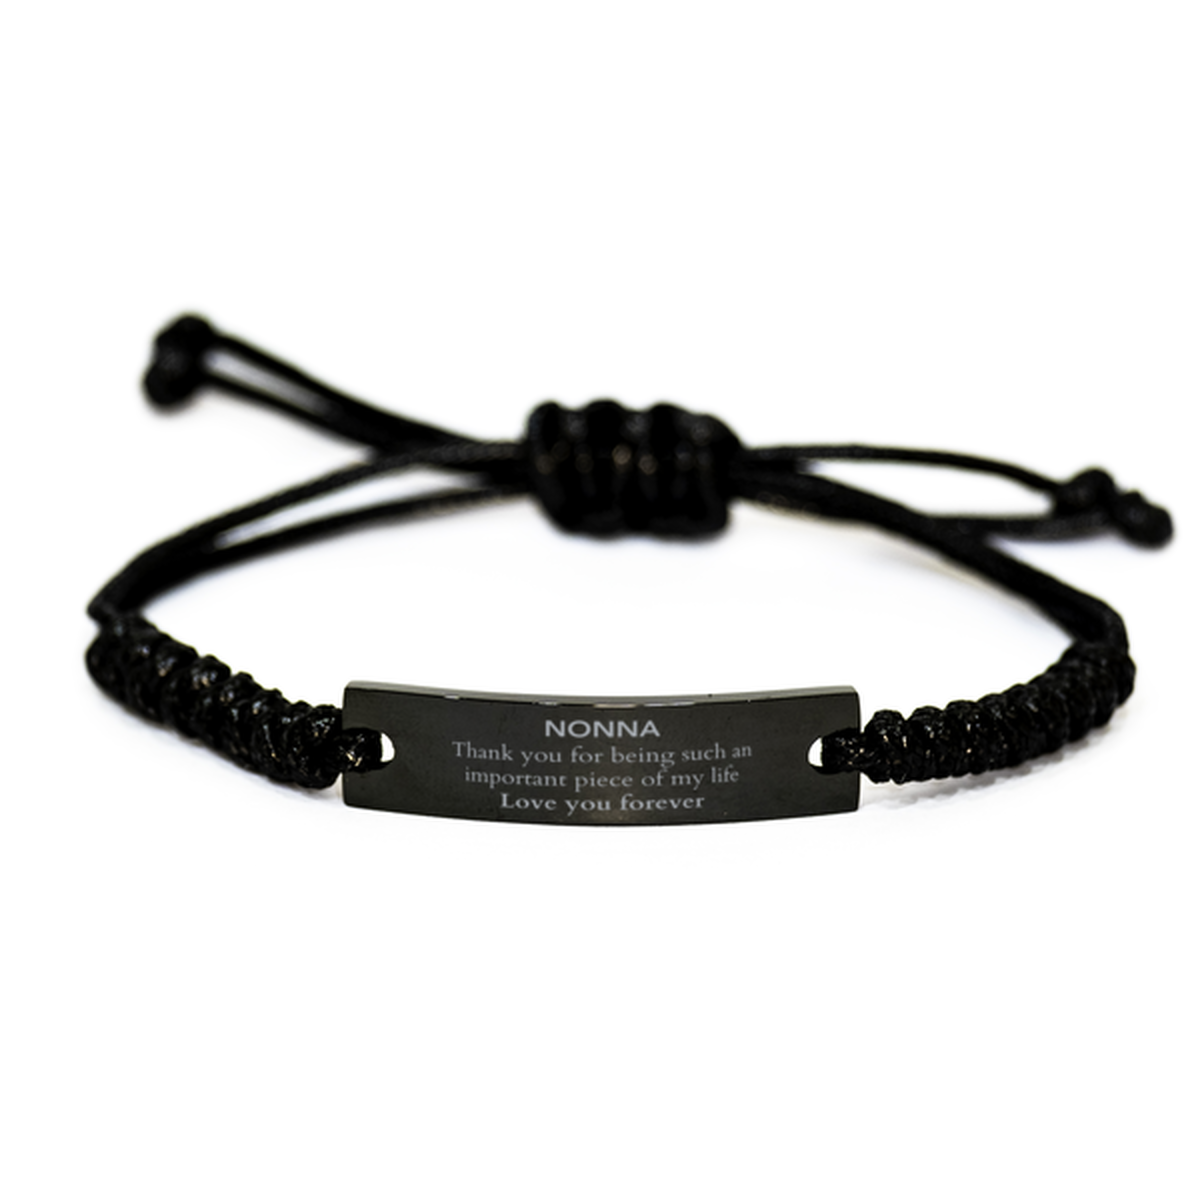 Appropriate Nonna Black Rope Bracelet Epic Birthday Gifts for Nonna Thank you for being such an important piece of my life Nonna Christmas Mothers Fathers Day